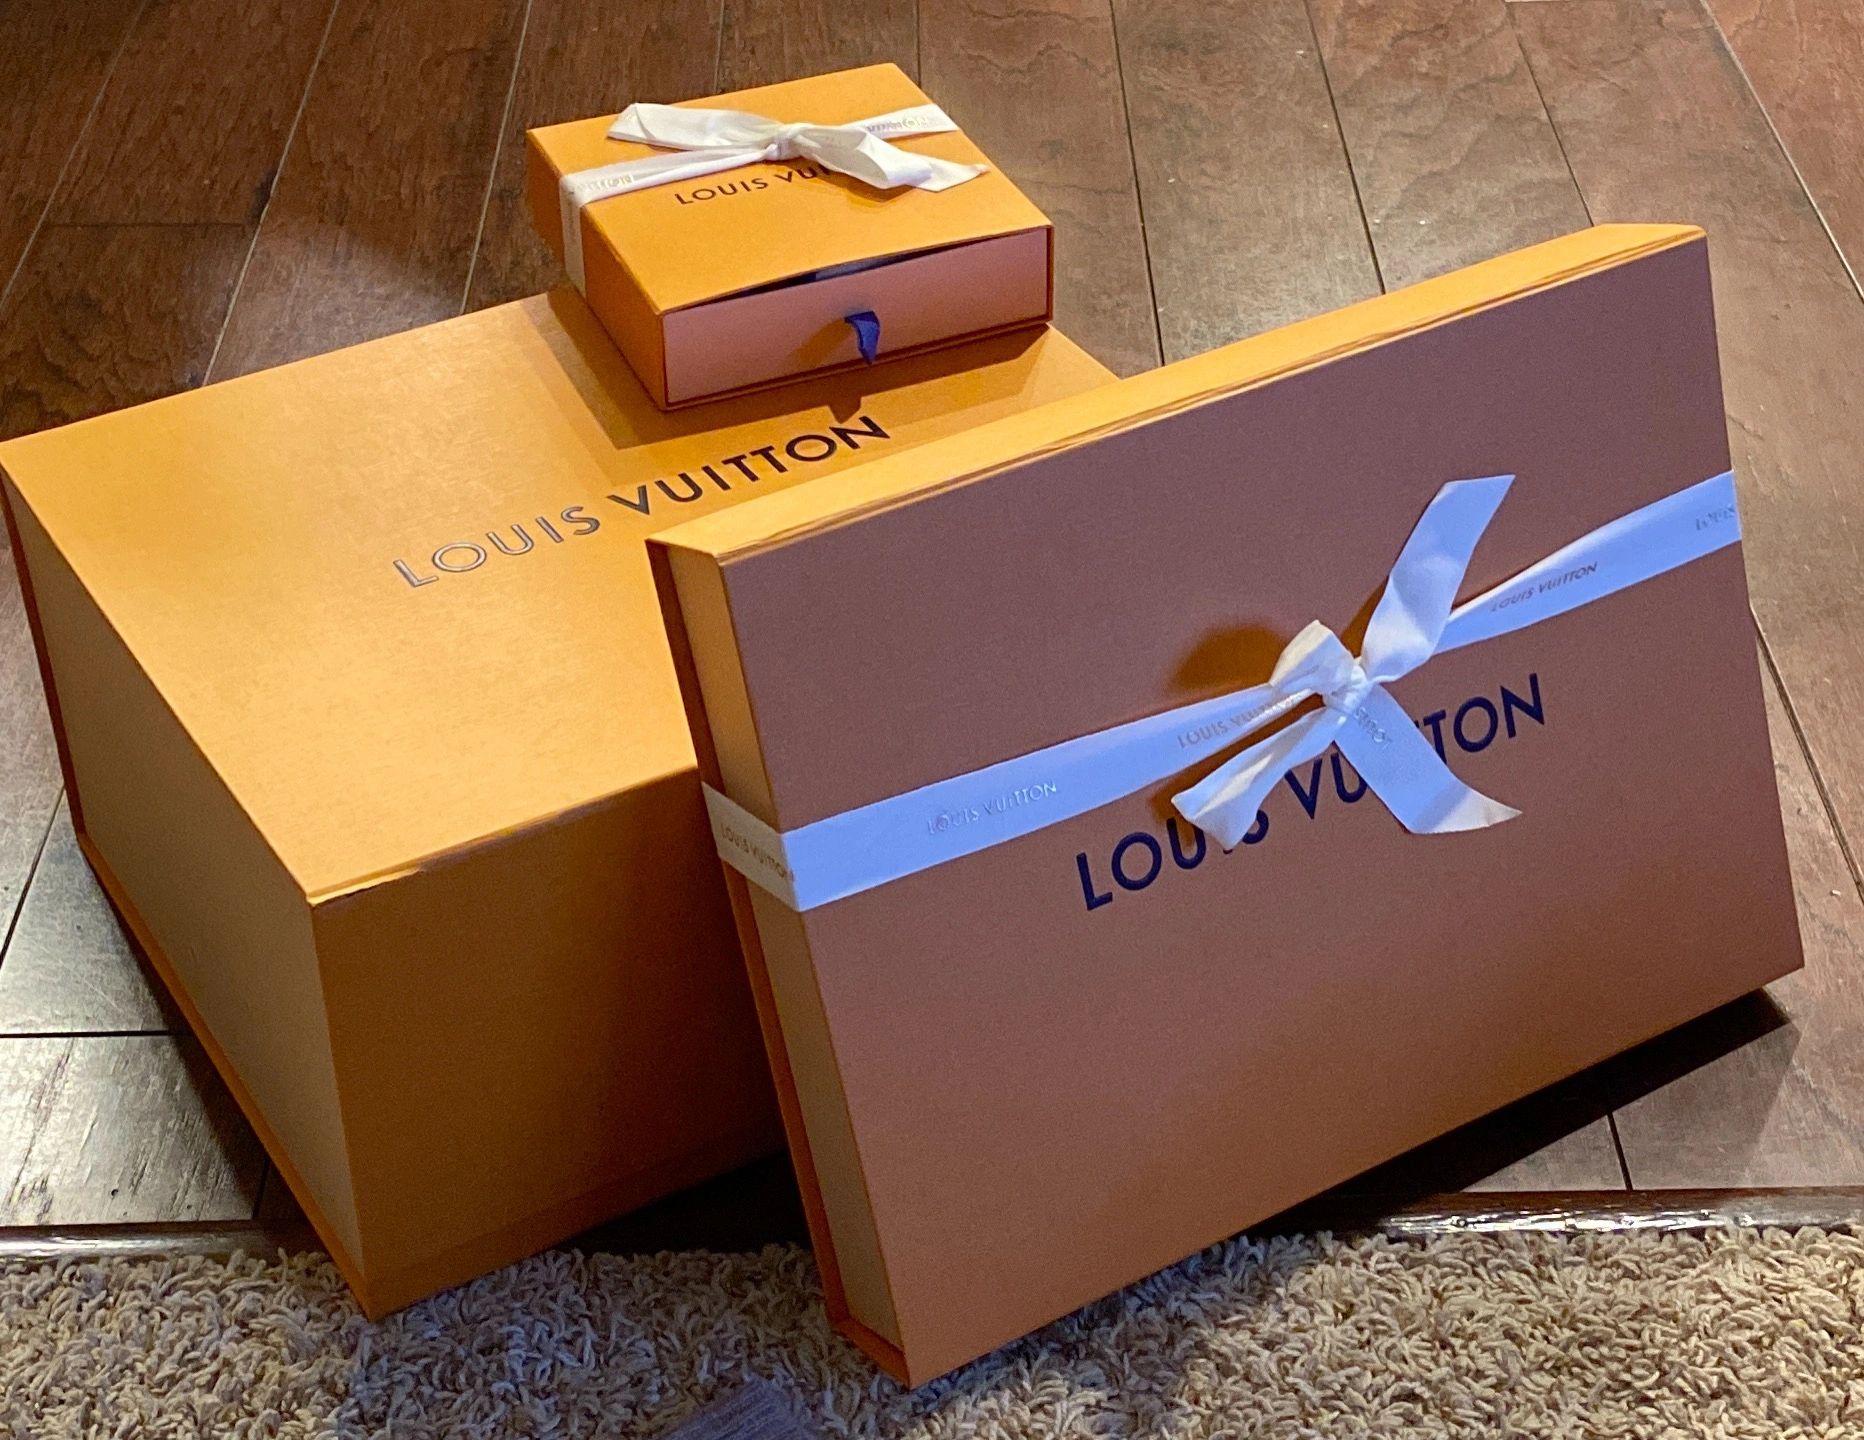 Louis Vuitton Unboxing! A Gift You Can't Buy! 